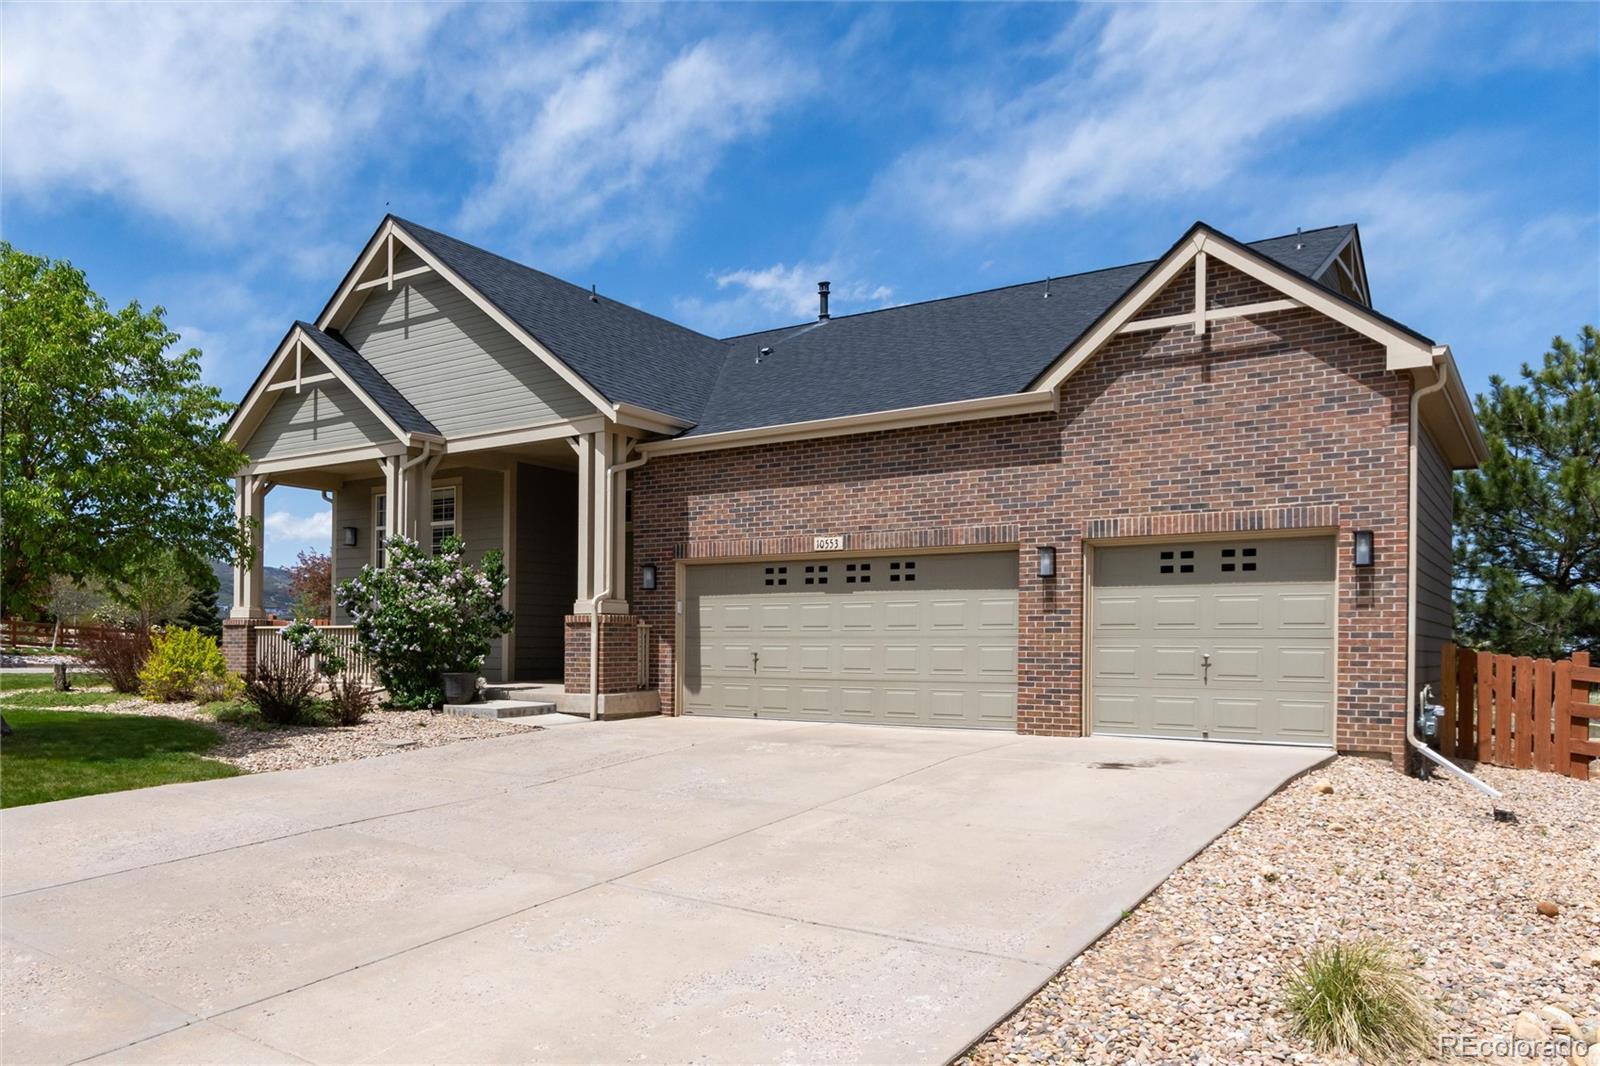 10553  kicking horse drive, Littleton sold home. Closed on 2024-06-07 for $925,000.